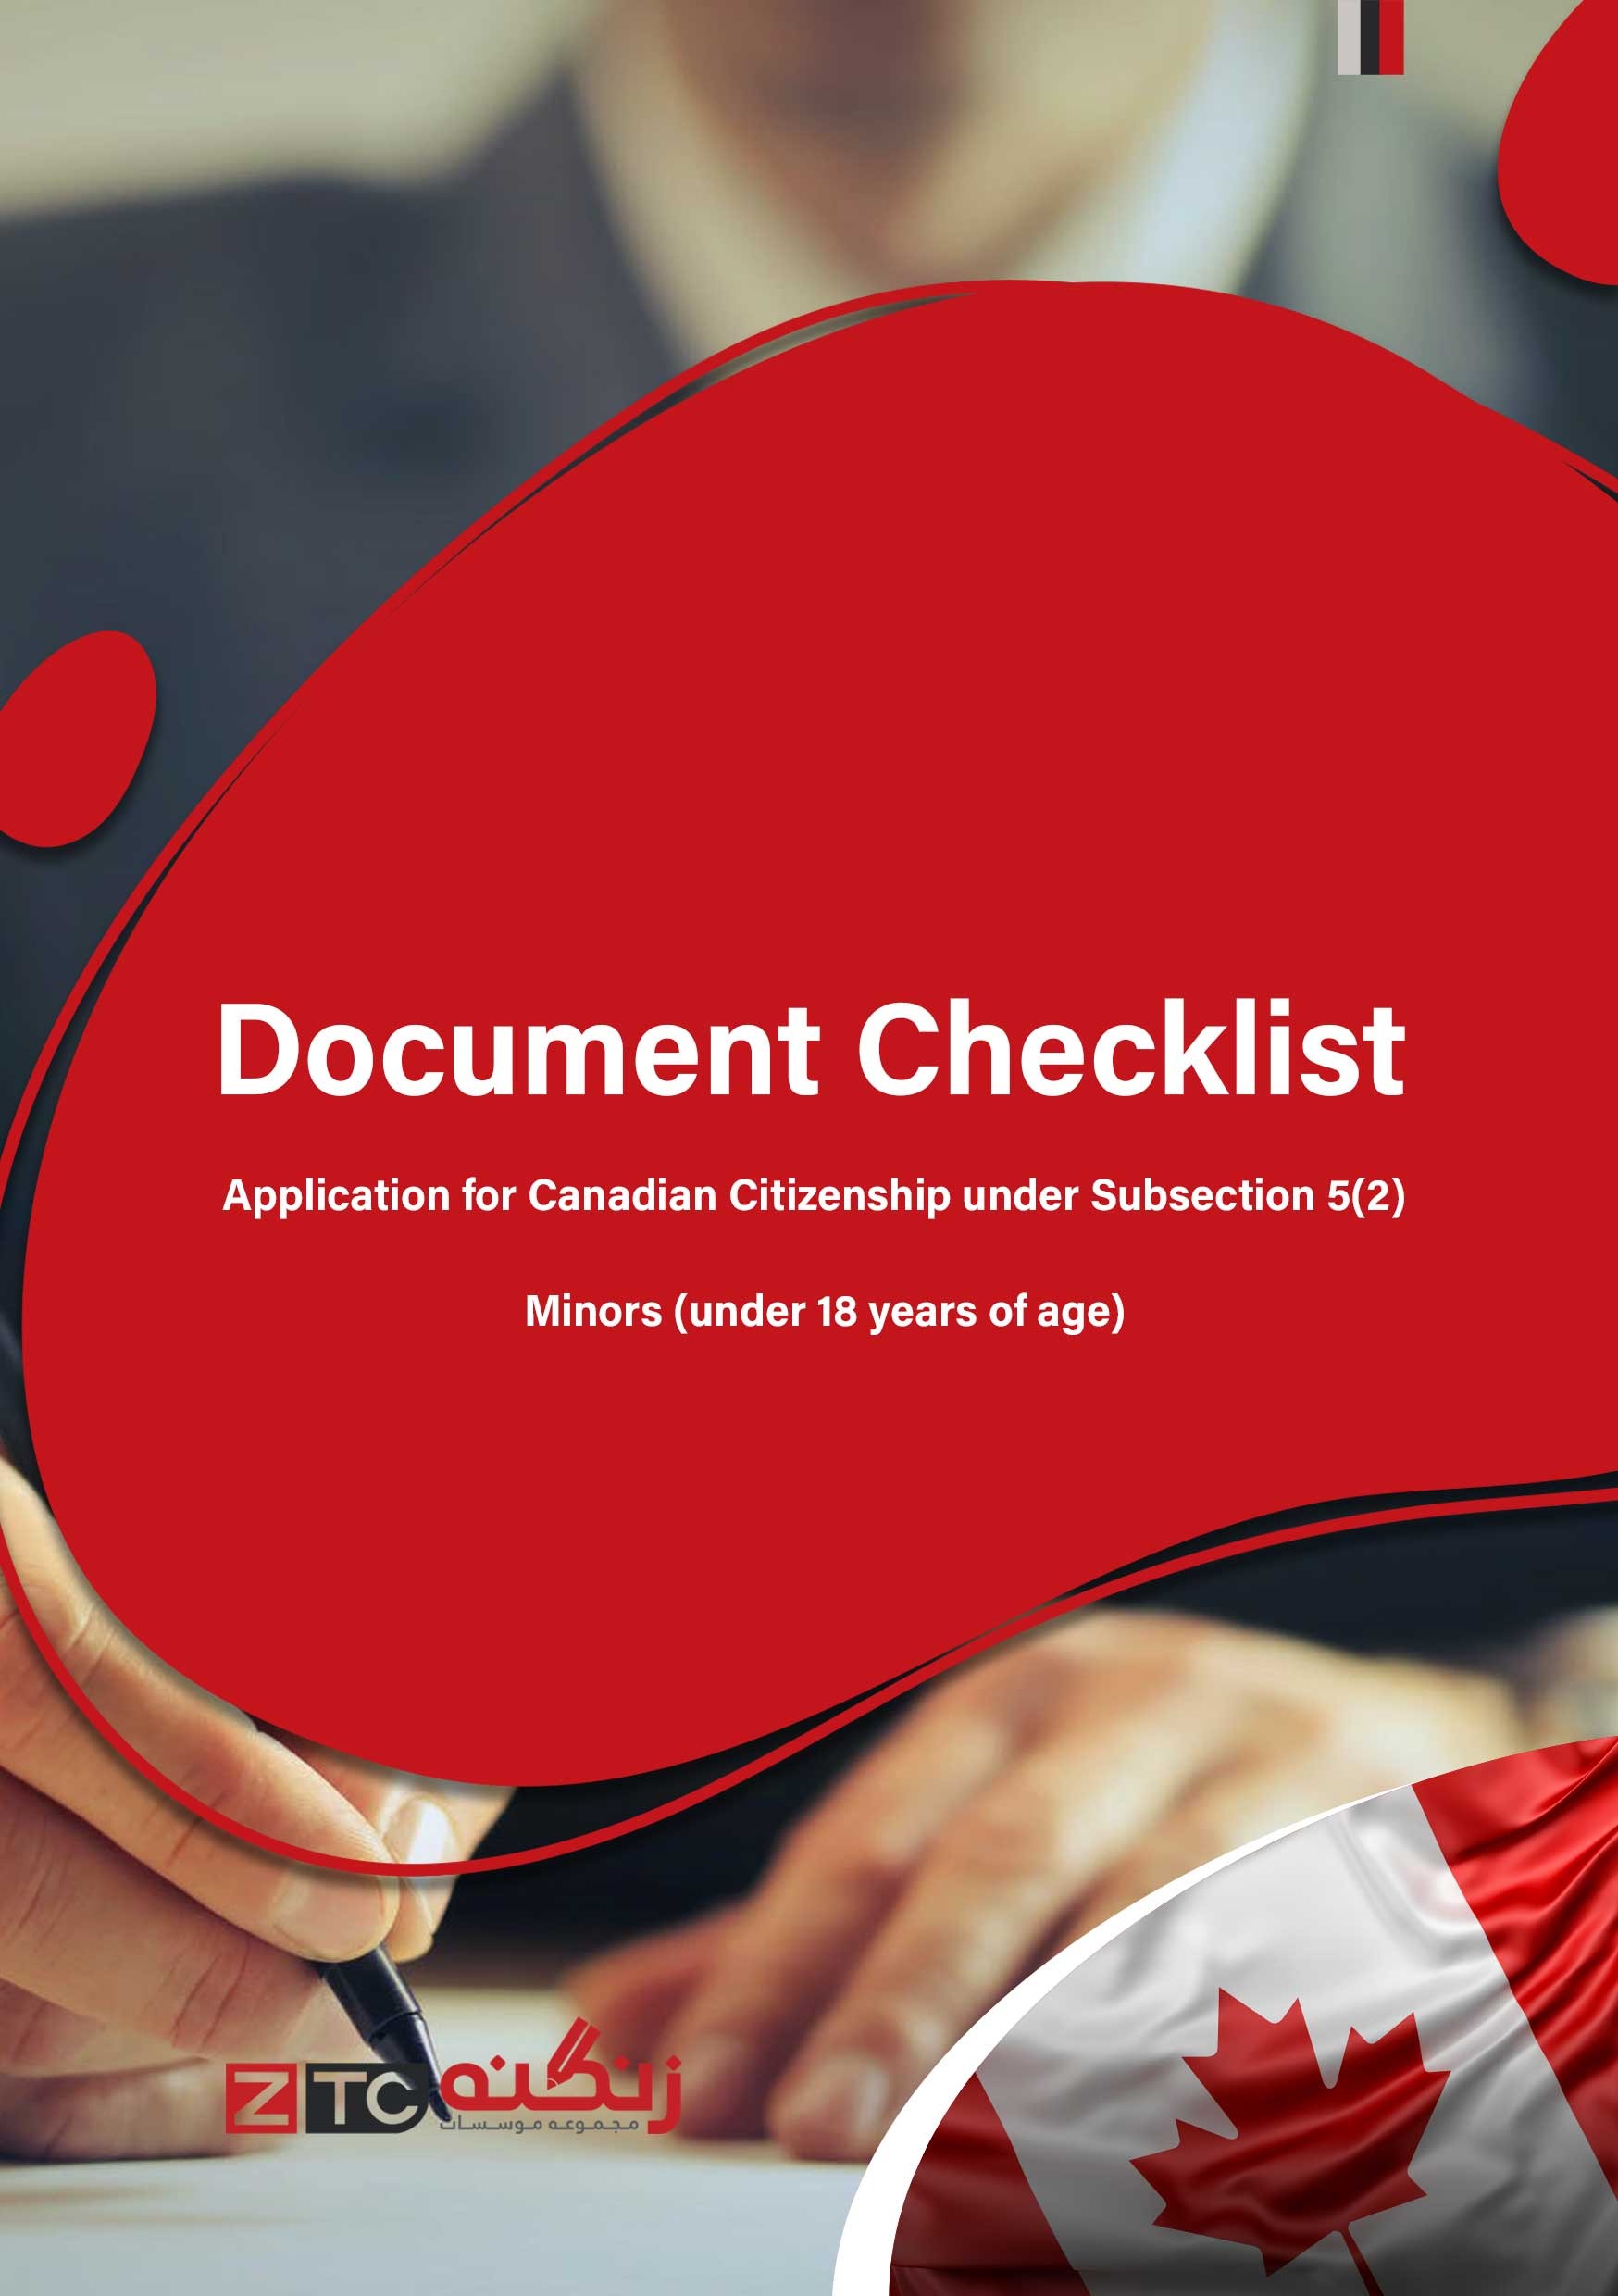 Document Checklist Application for Canadian Citizenship under Subsection 5(2) Minors (under 18 years of age)